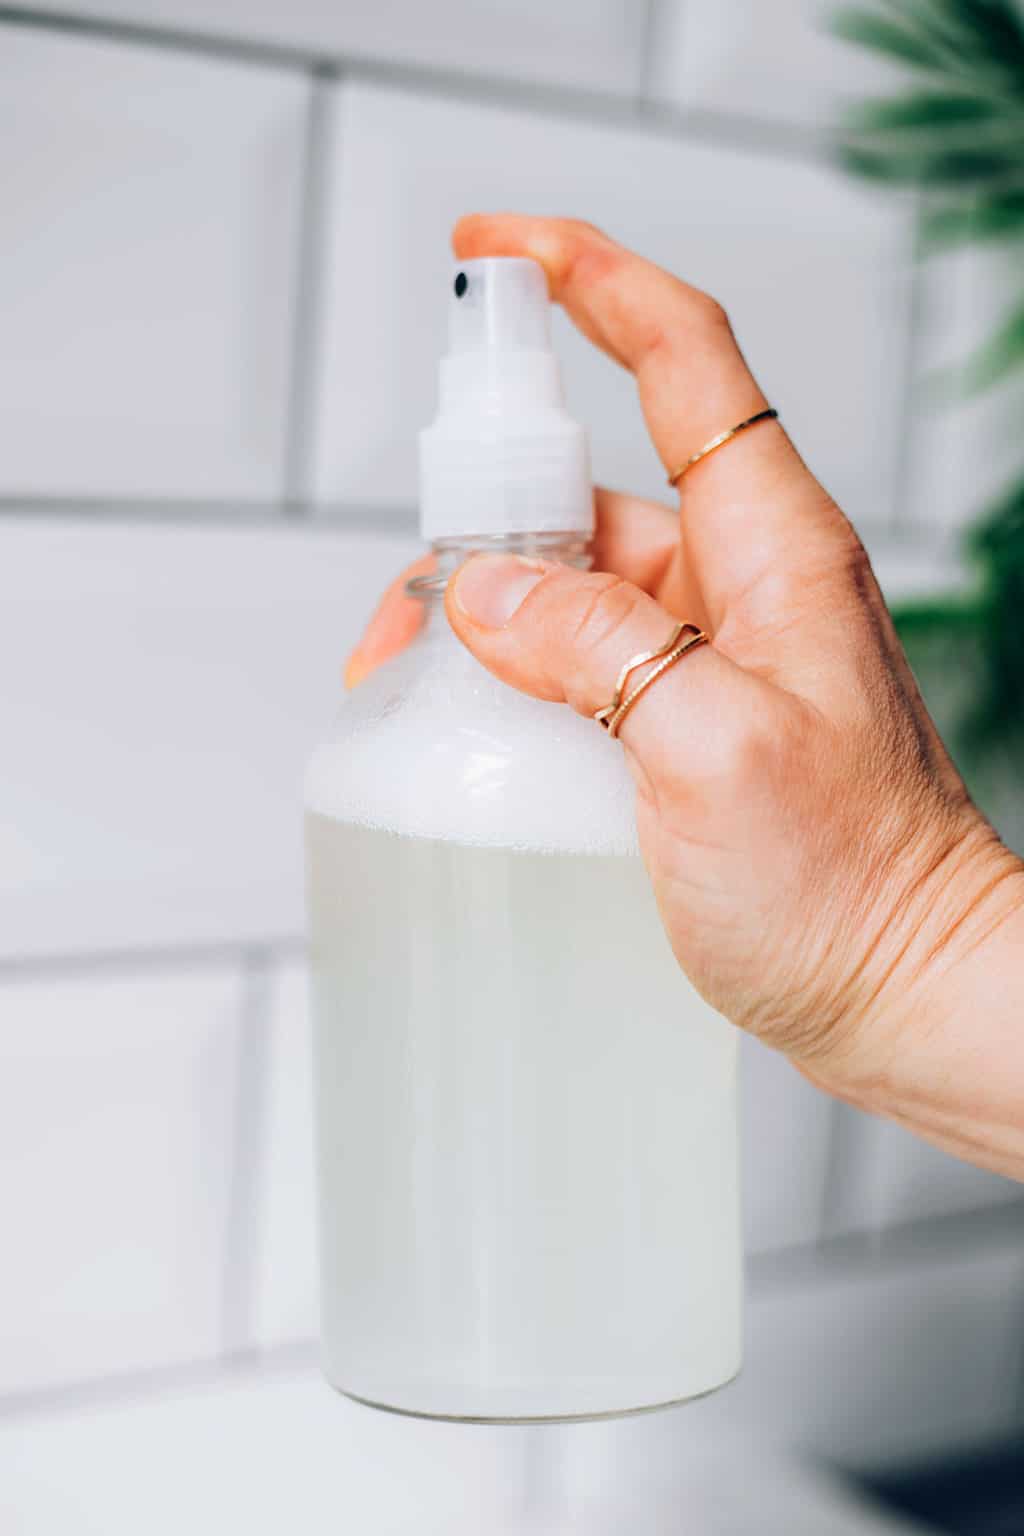 A daily spritz of this homemade shower spray will keep soap buildup and mildew at bay.